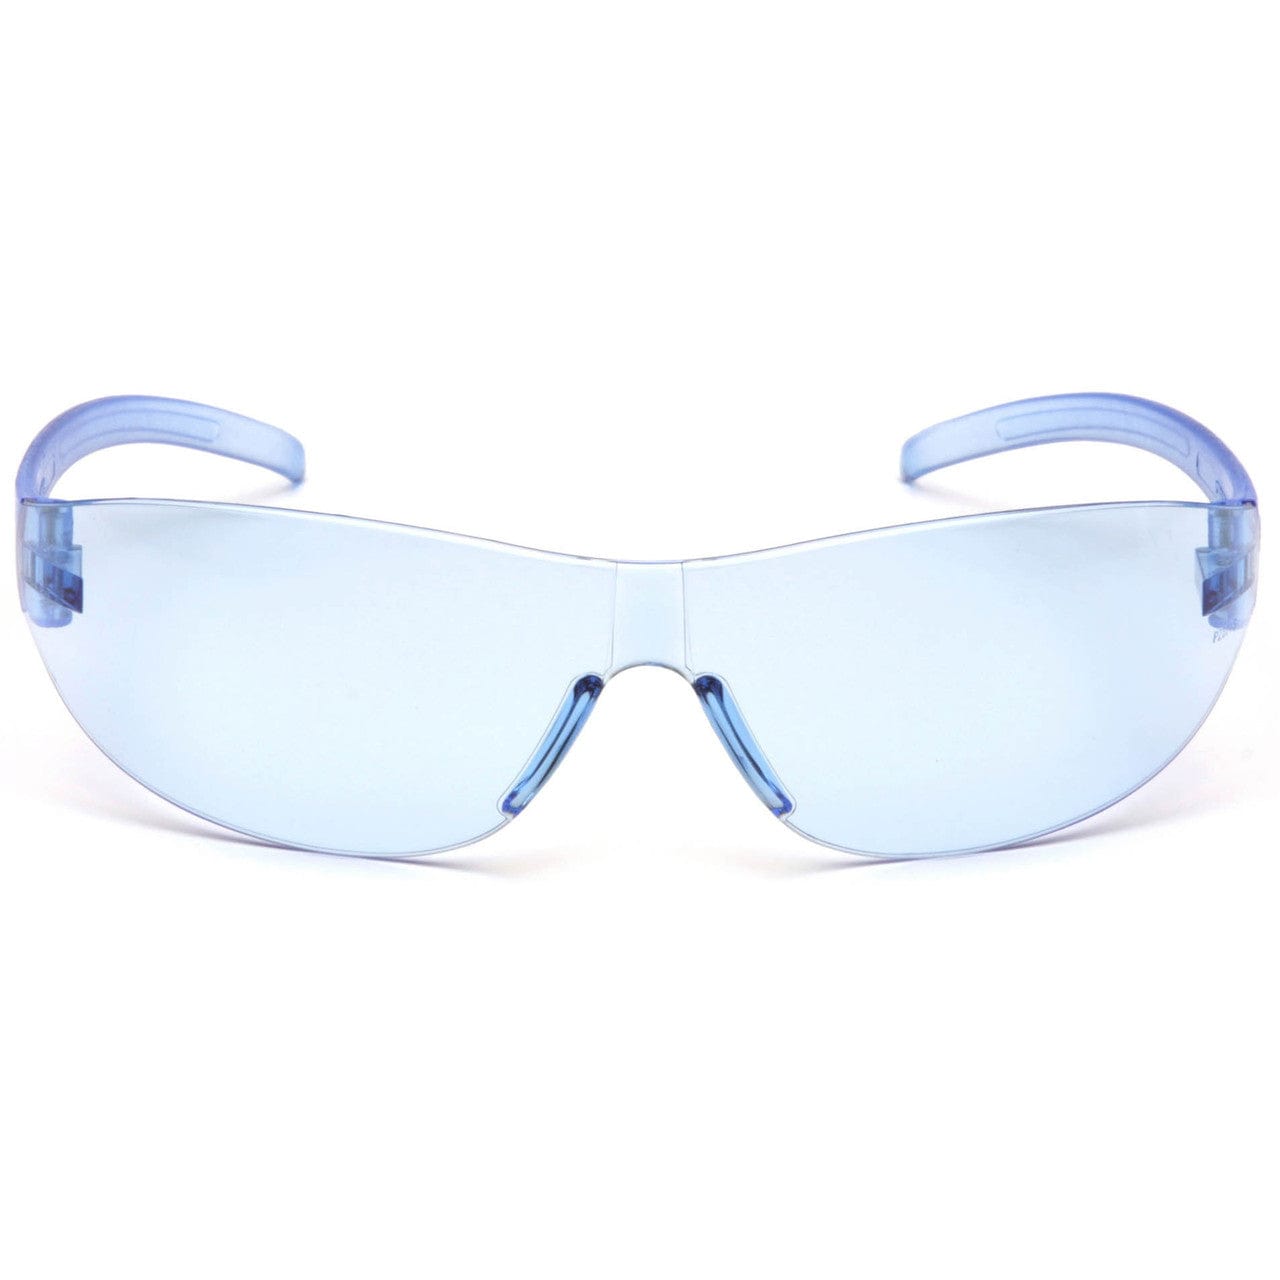 Pyramex Alair Safety Glasses with Infinity Blue Lens S3260S Front View